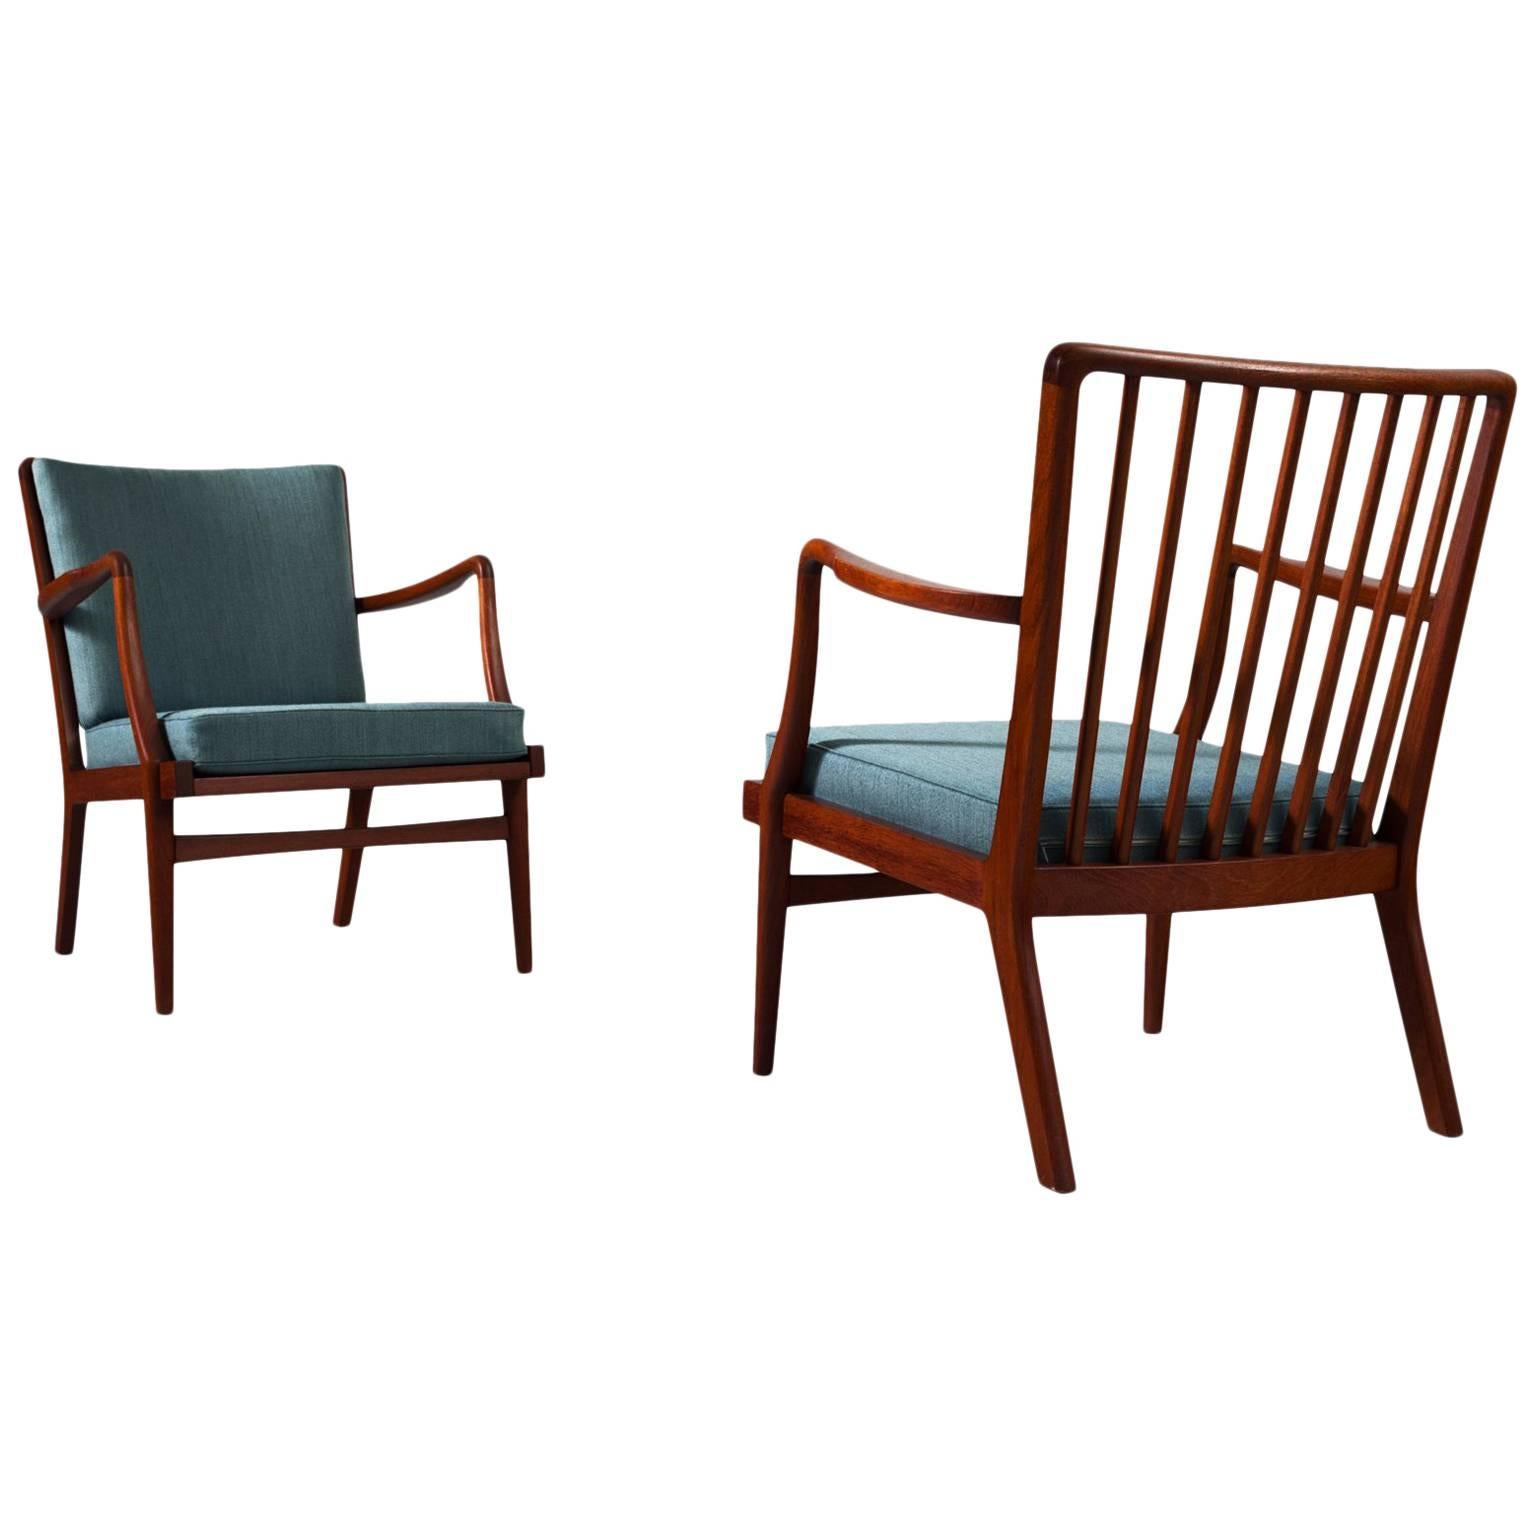 Peder Christensen Set of Two Teak Easy Chairs with Blue Fabric Upholstery